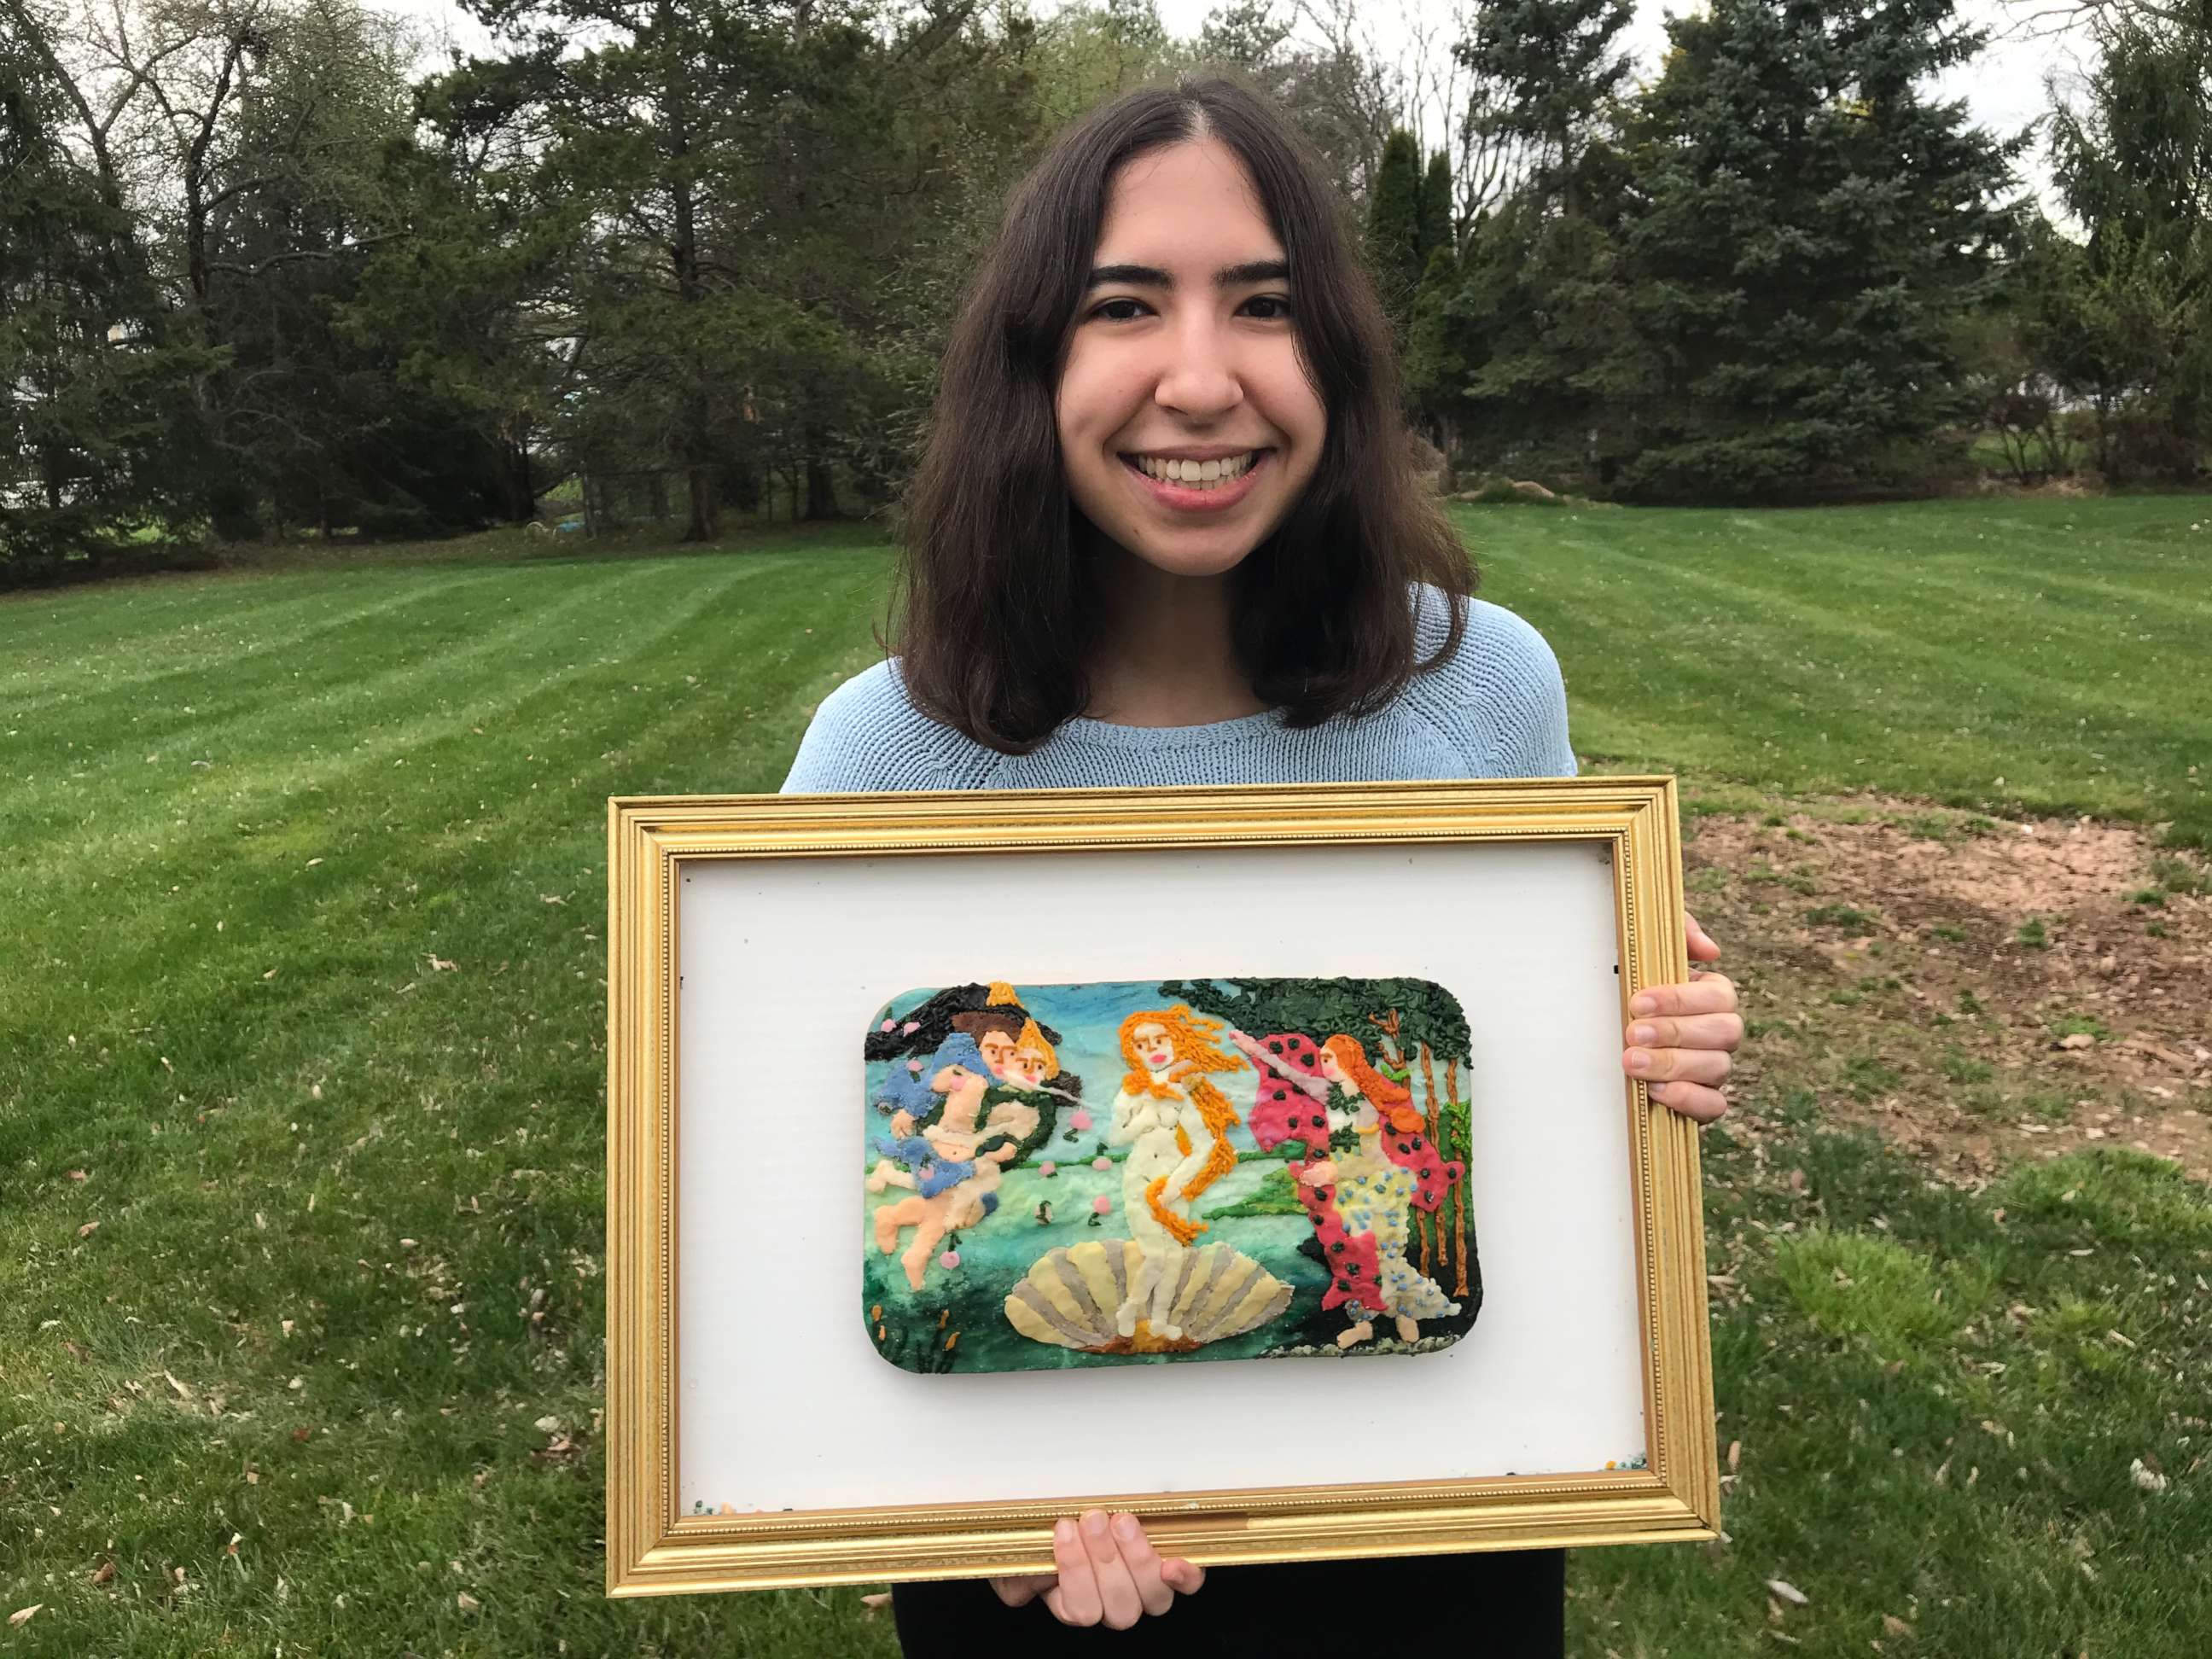 PHOTO: Emily Zauzmer with her baked and iced recreation of The Birth of Venus.